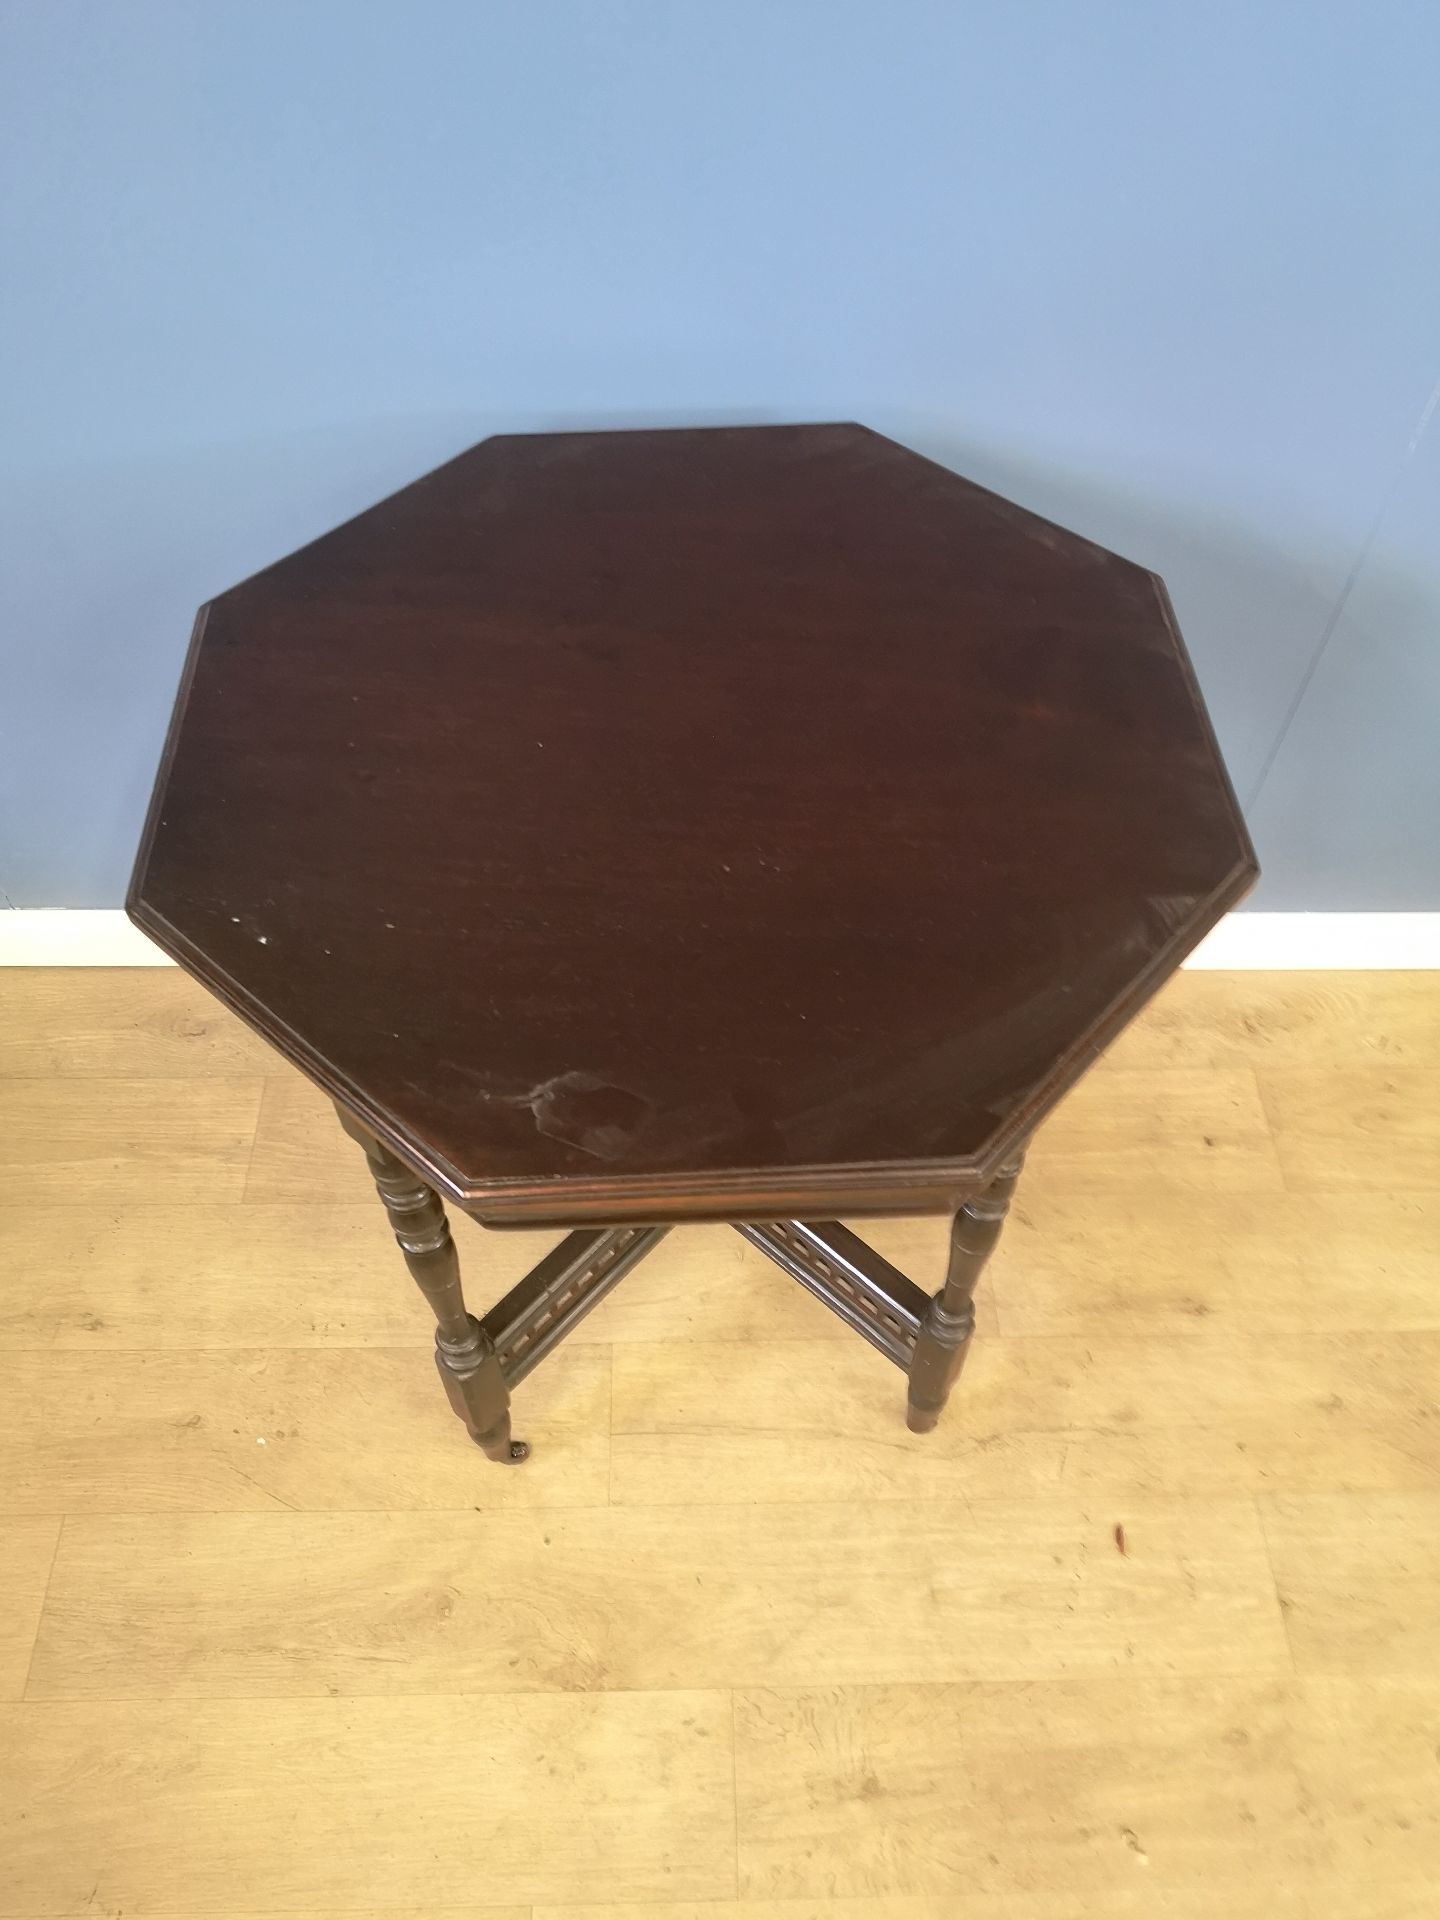 Octagonal display table - Image 4 of 4